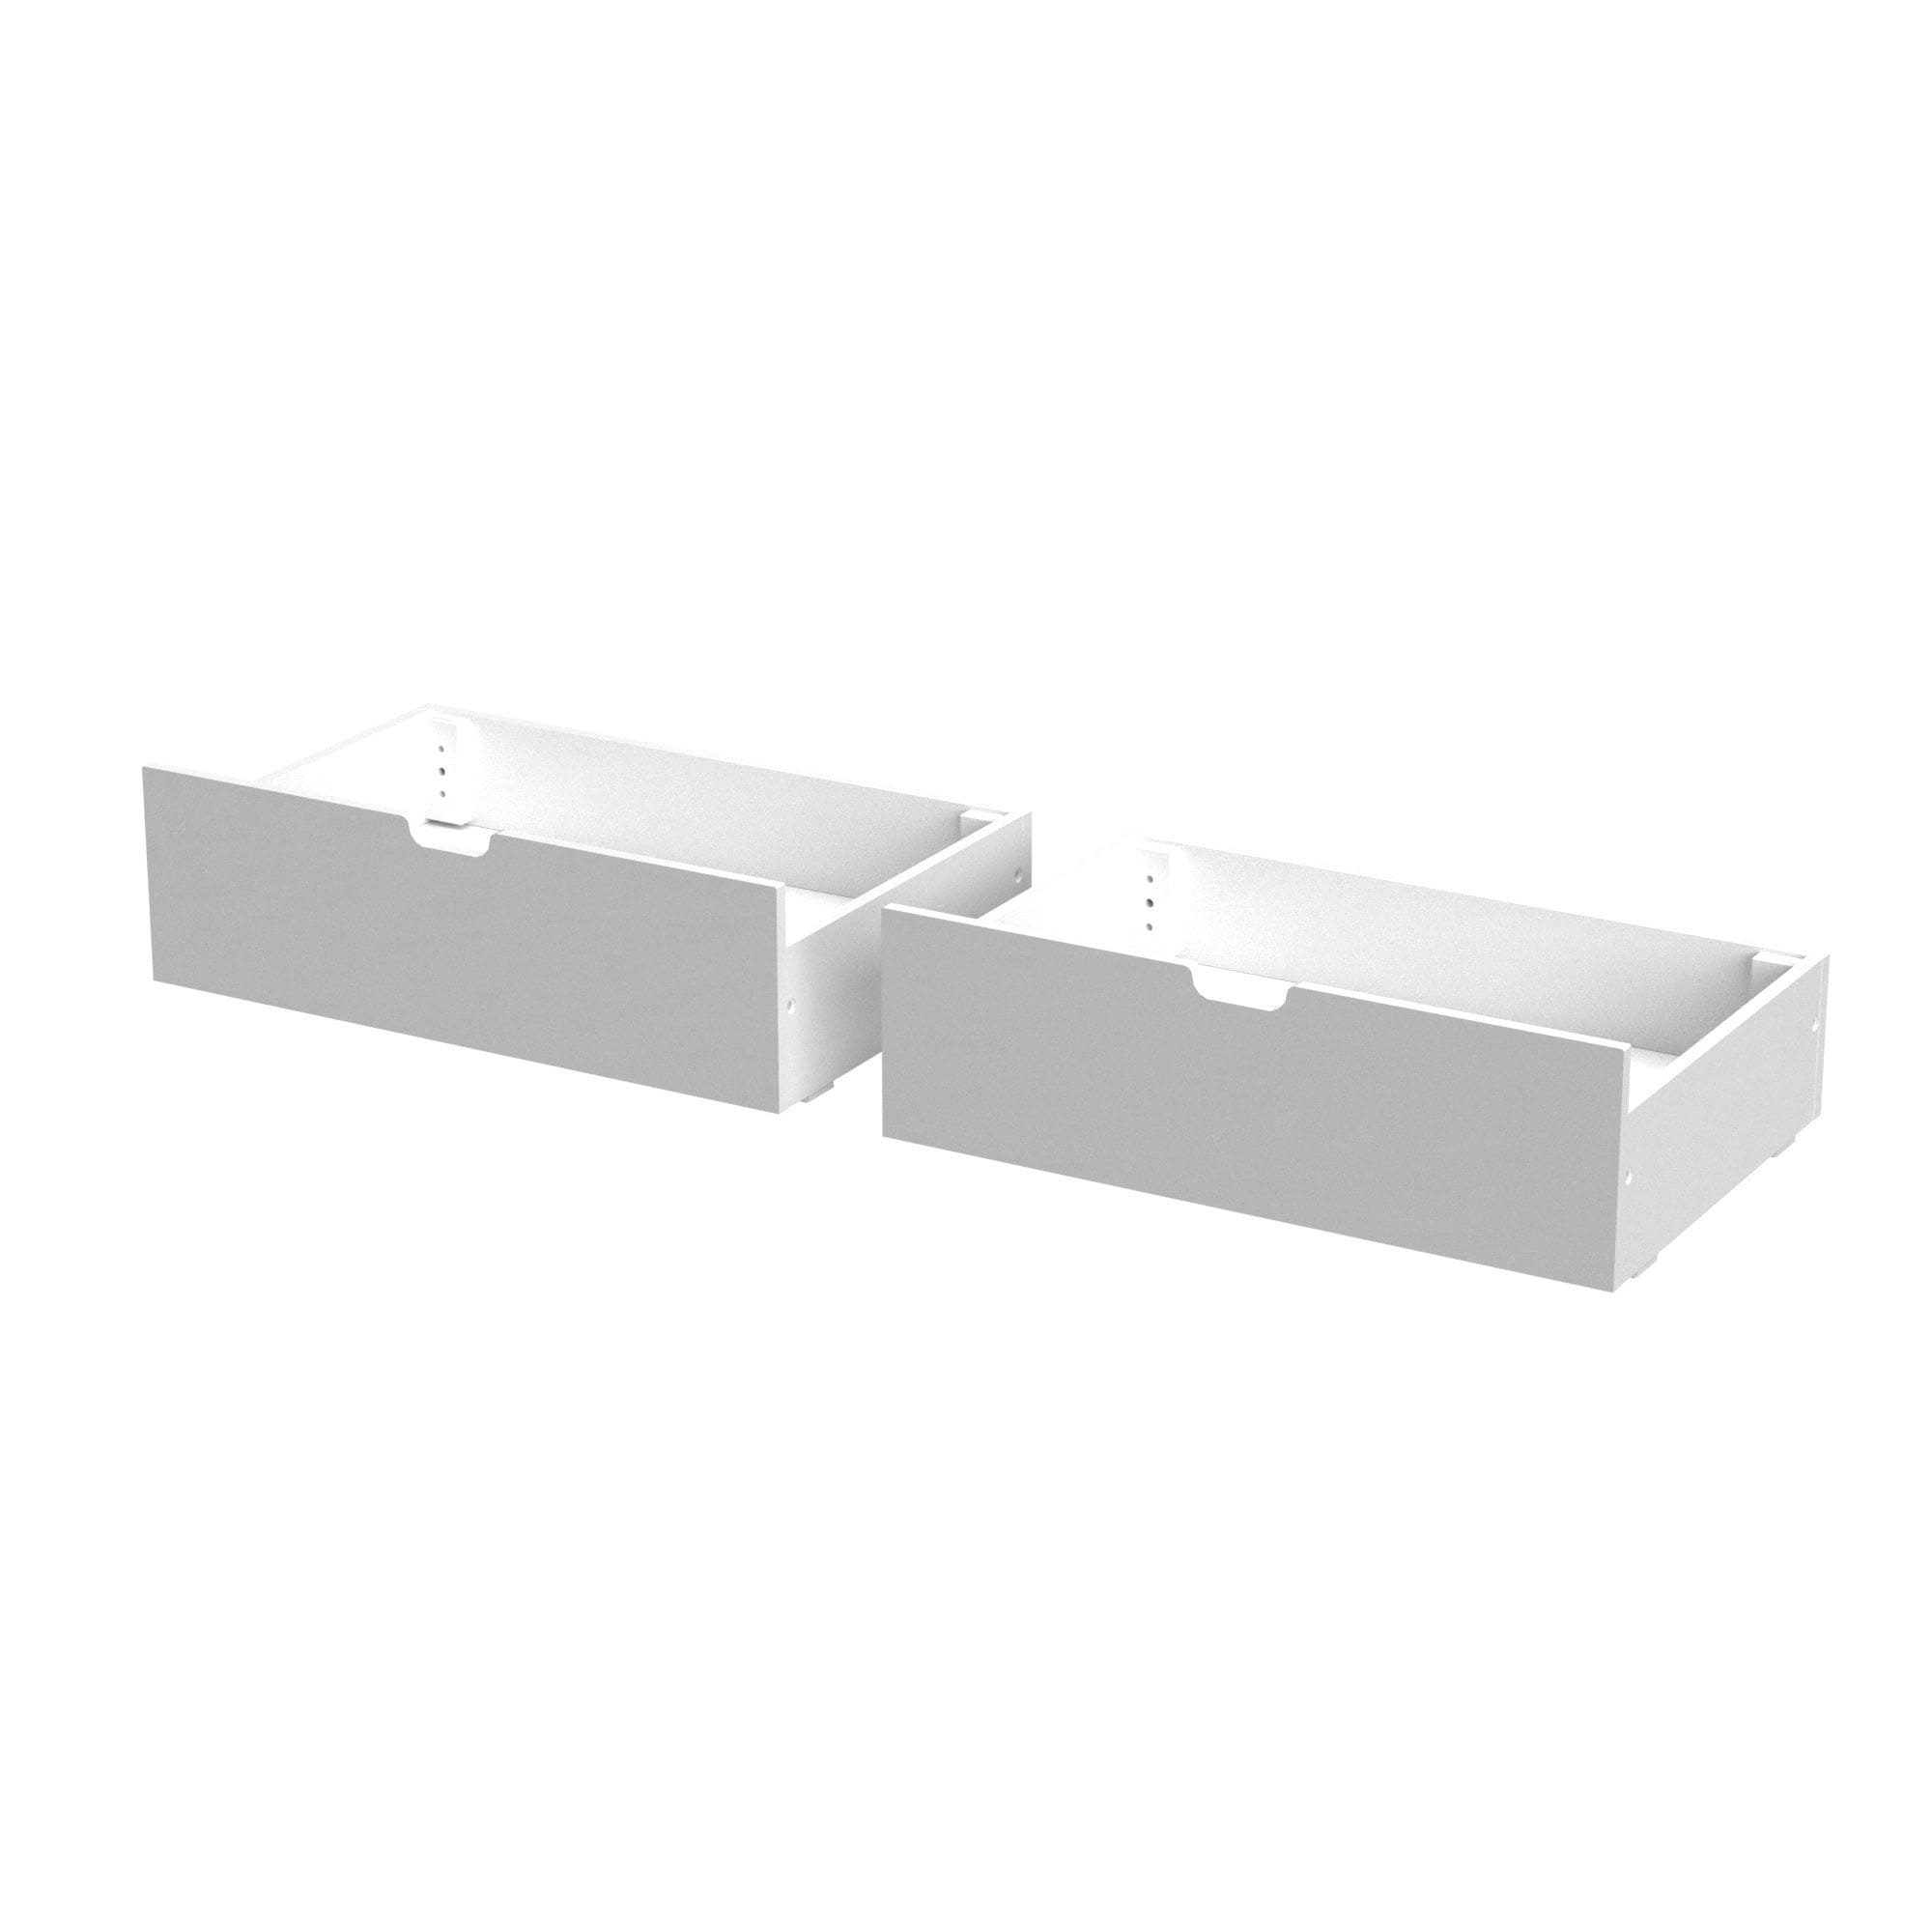 https://ak1.ostkcdn.com/images/products/is/images/direct/cd9e86db7f8c00214a8f42155b0583a6cec78f8a/Max-%26-Lily-Under-Bed-Storage-Drawers.jpg